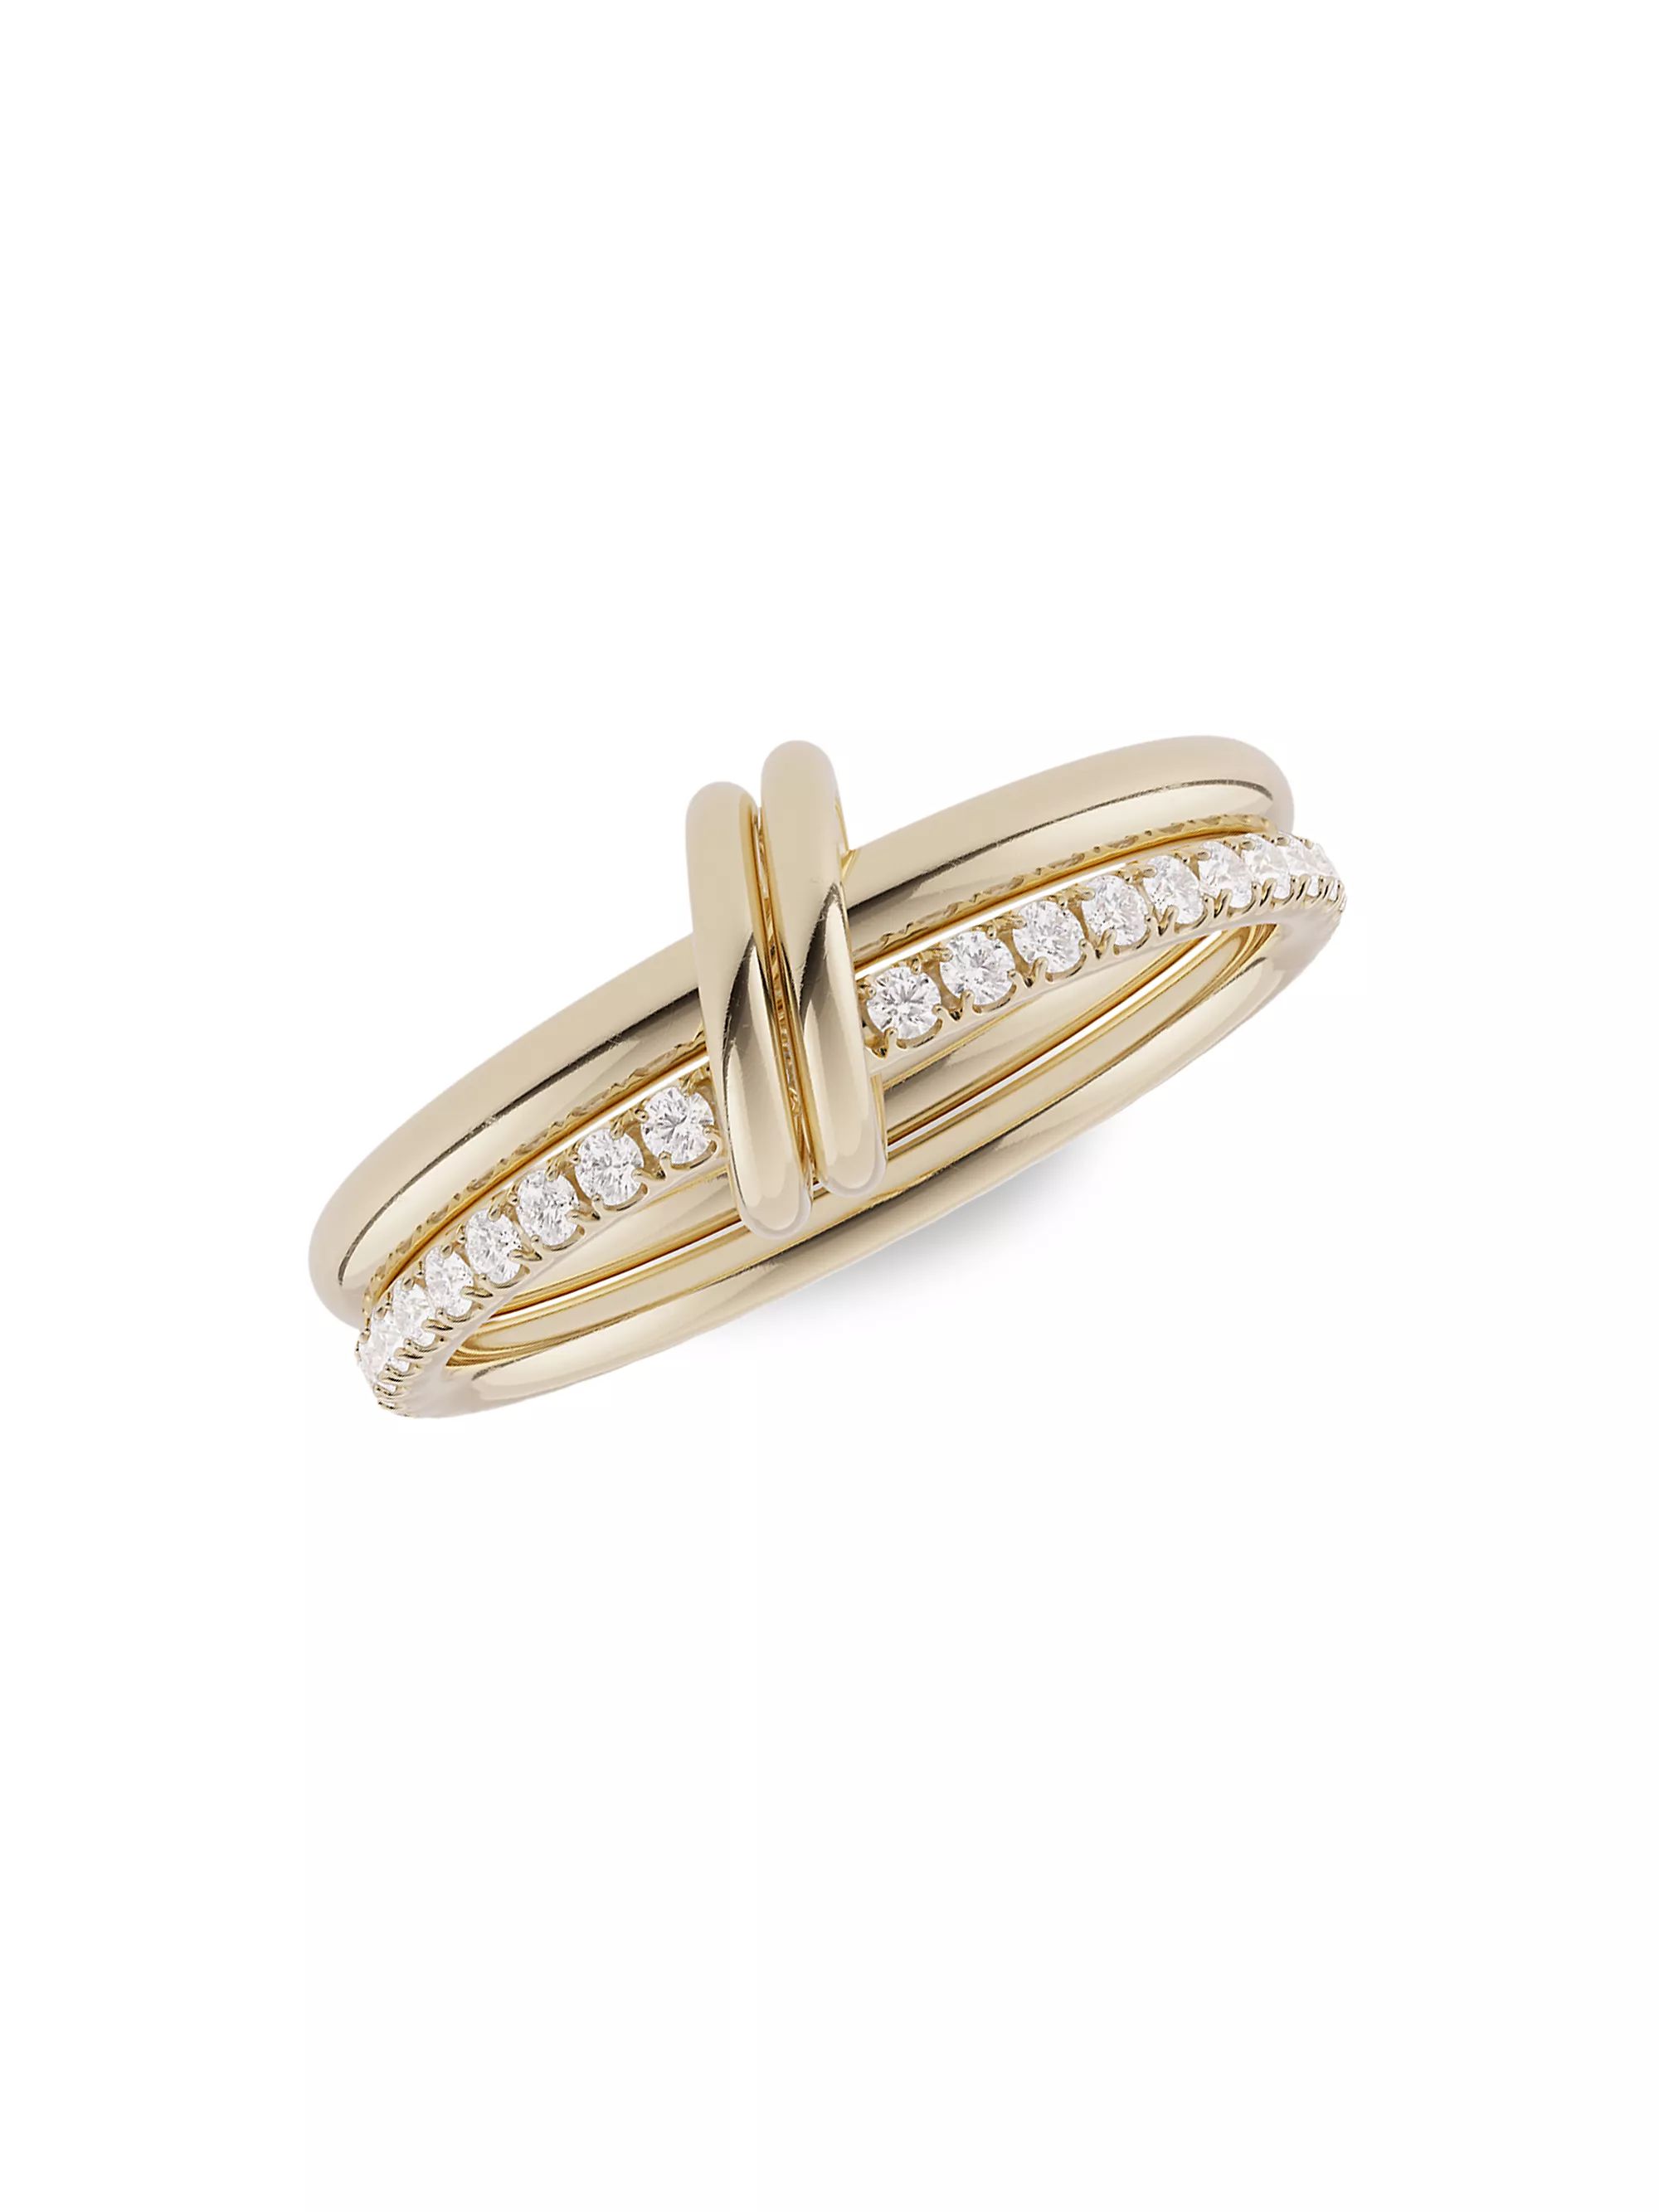 Ceres Deux 18K Yellow Gold & Diamond 2-Link Ring | Saks Fifth Avenue